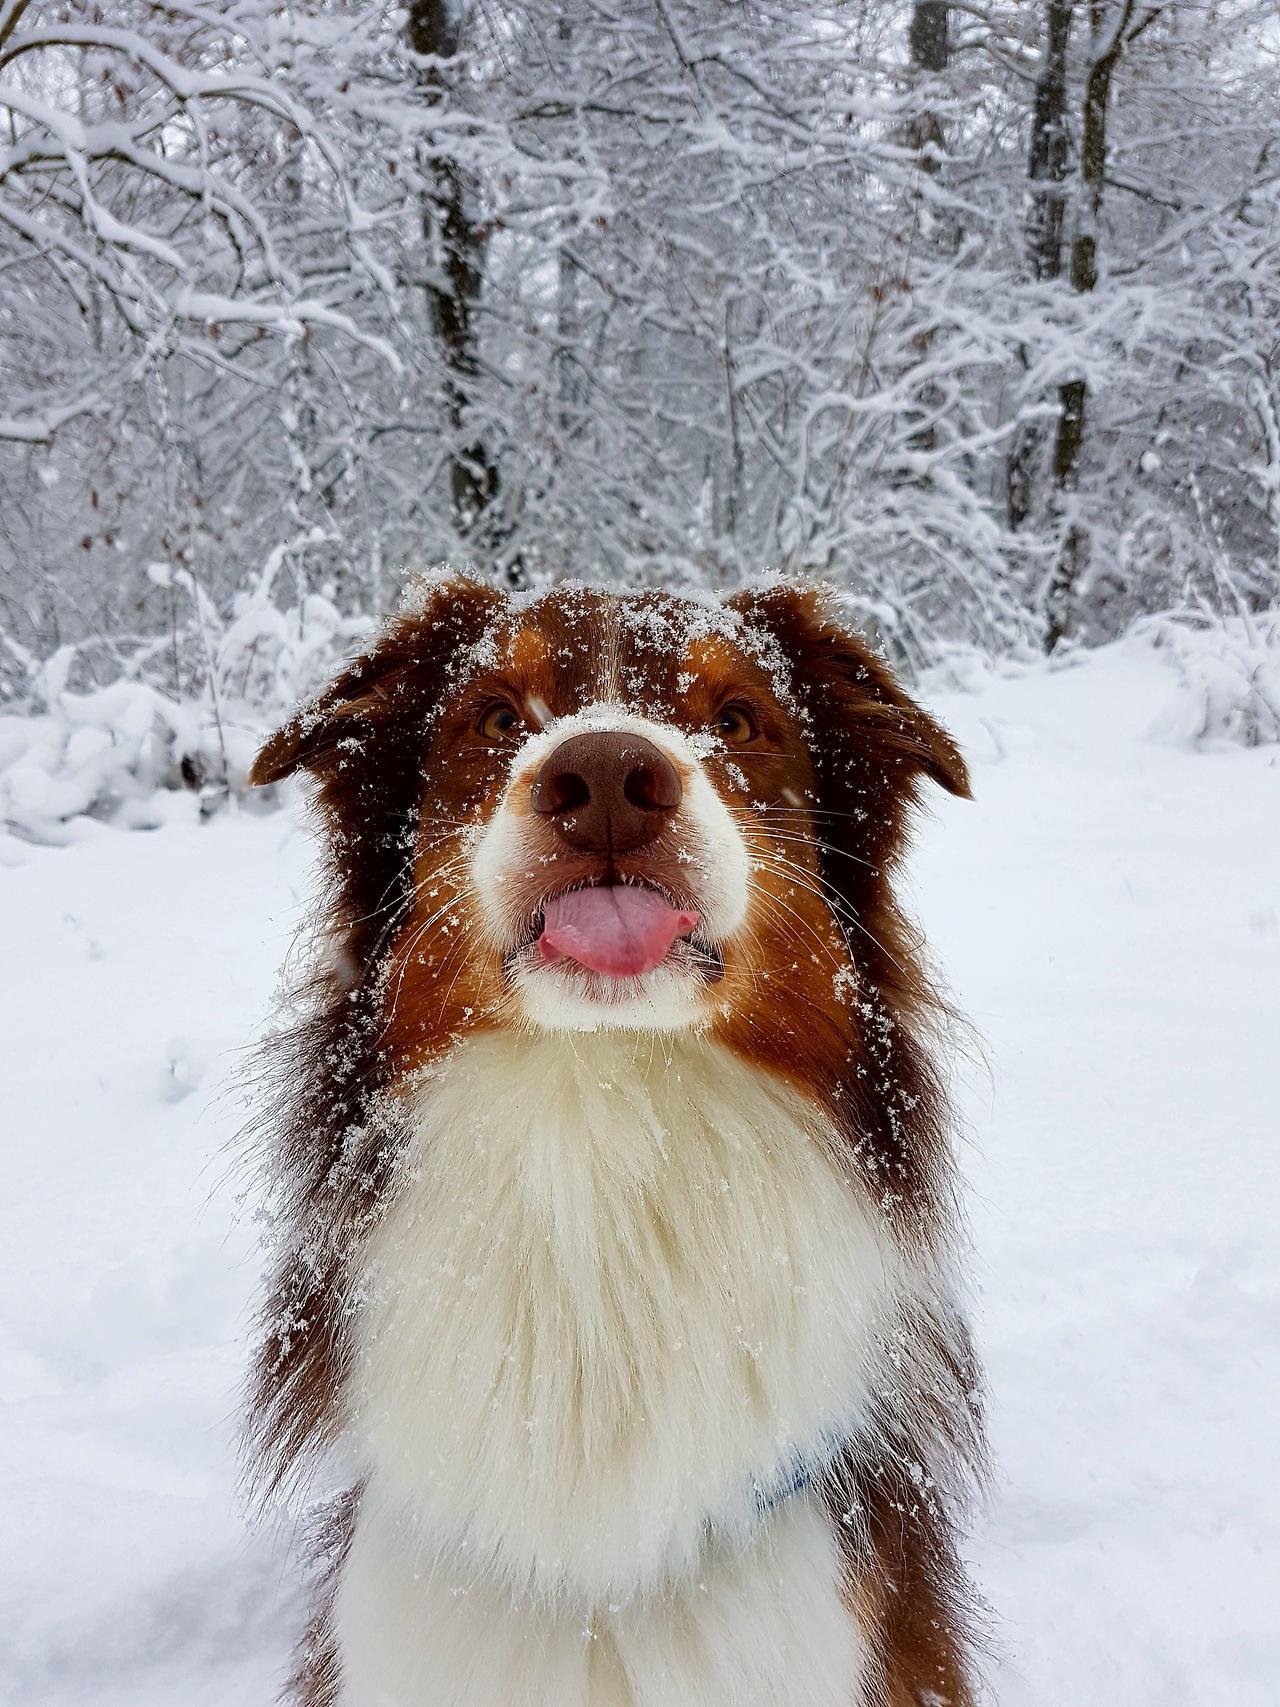 He tried to catch the snowflakes ;) (Source: http://ift.tt/2oqbxNT)